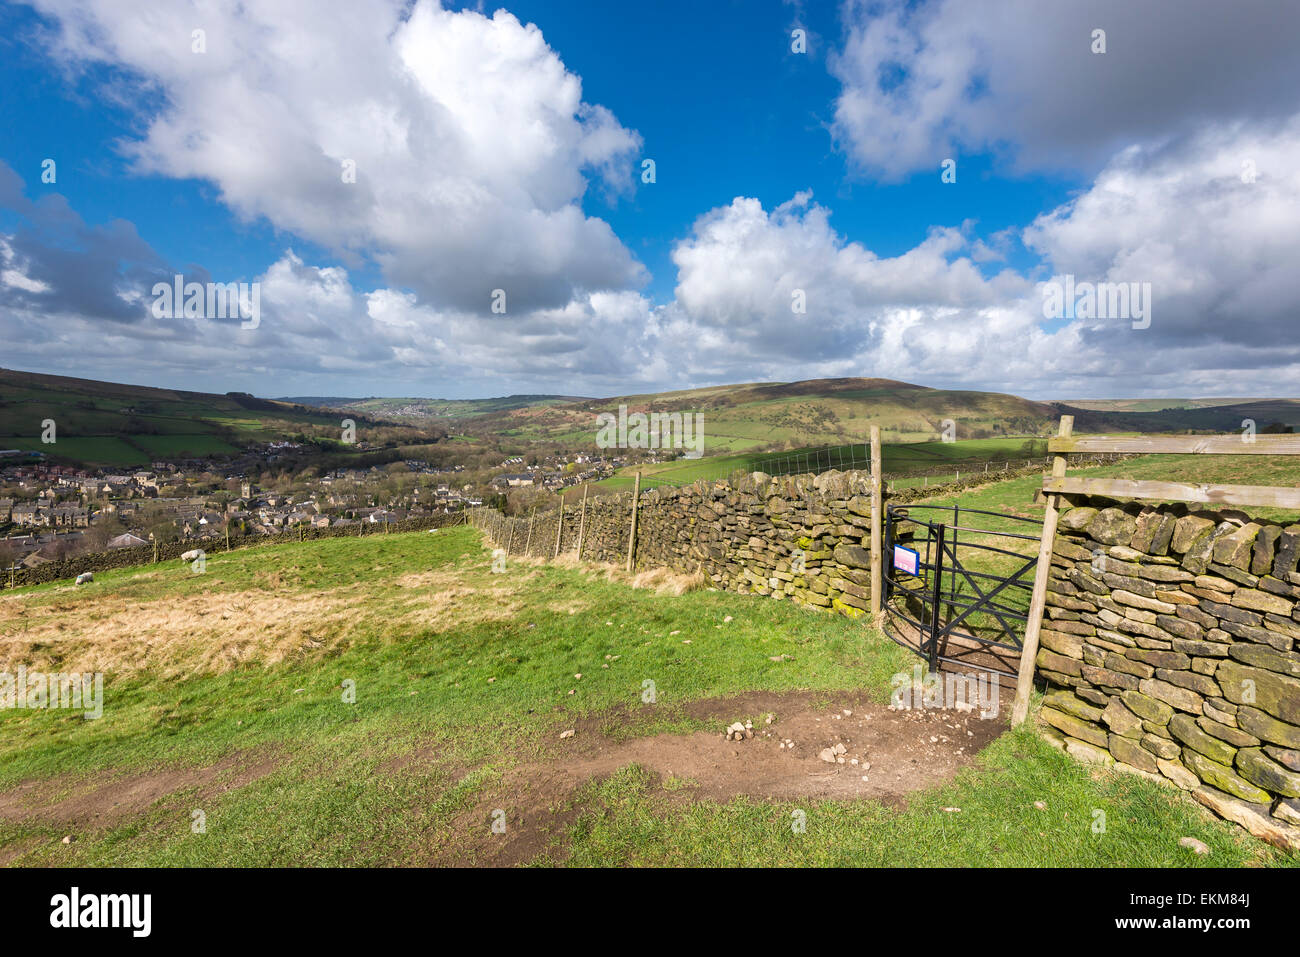 Kissing gate on a footpath above the village of Hayfield in Derbyshire. Popular walking and cycling route. Stock Photo